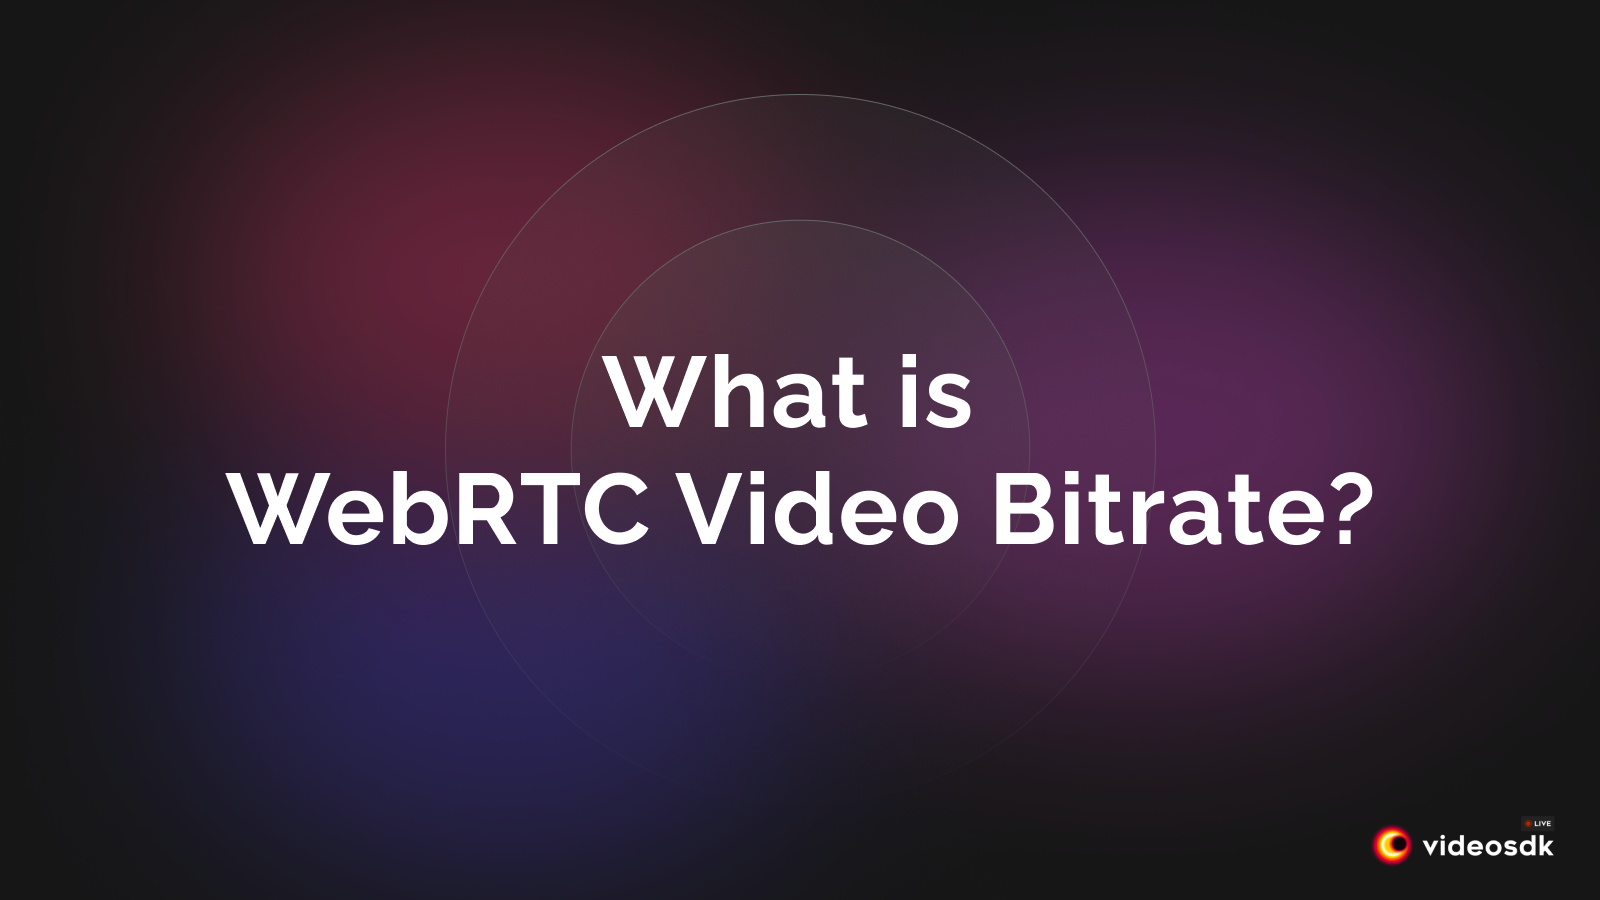 What is WebRTC Video Bitrate? How Does it Affect Video Quality?